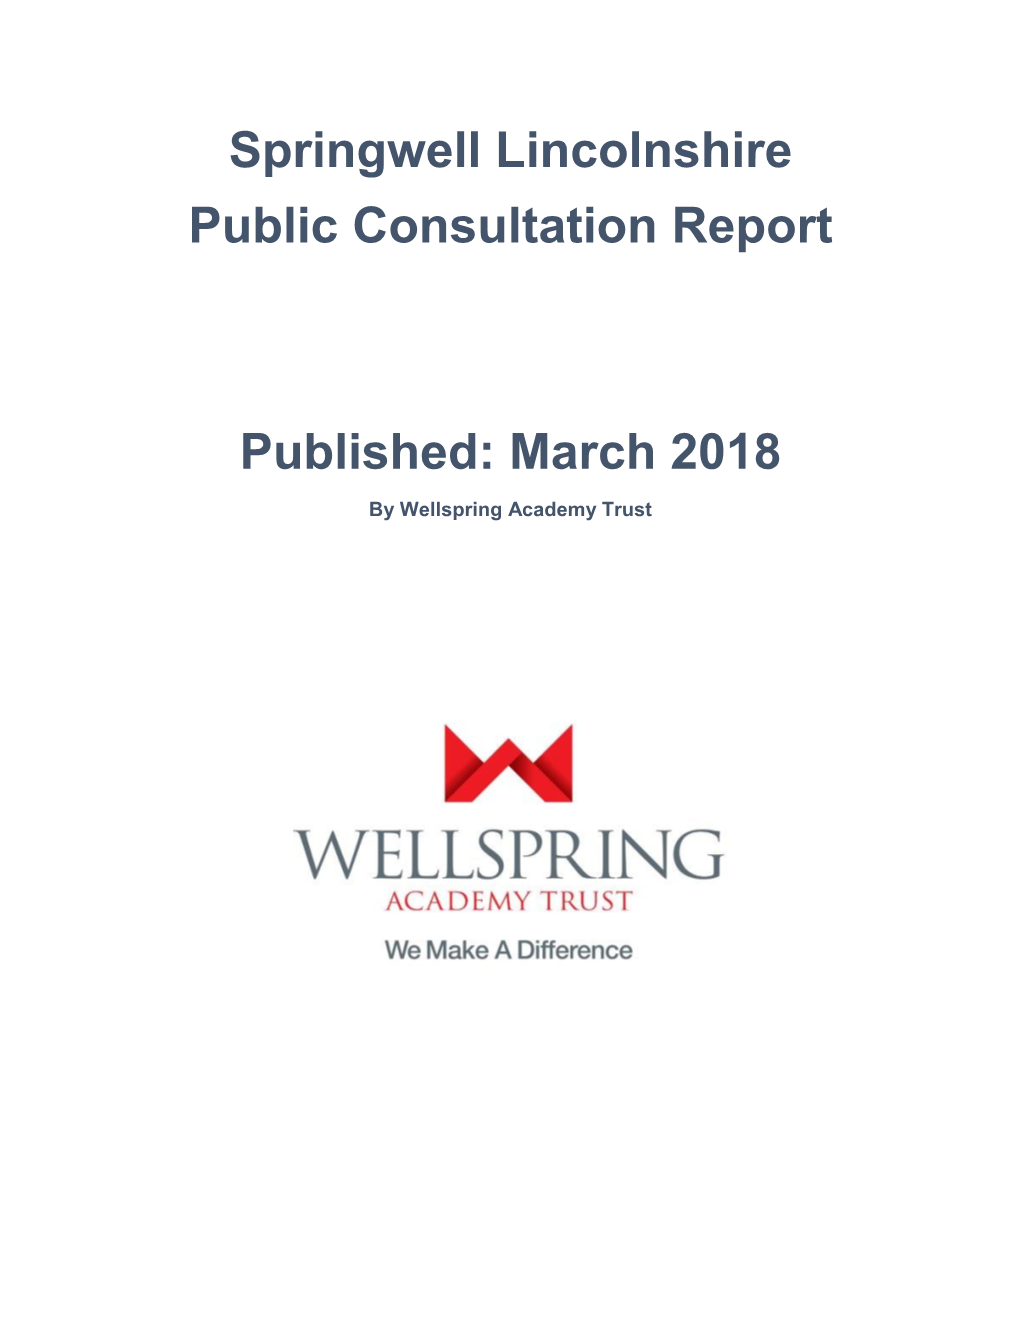 Springwell Lincolnshire Public Consultation Report Published